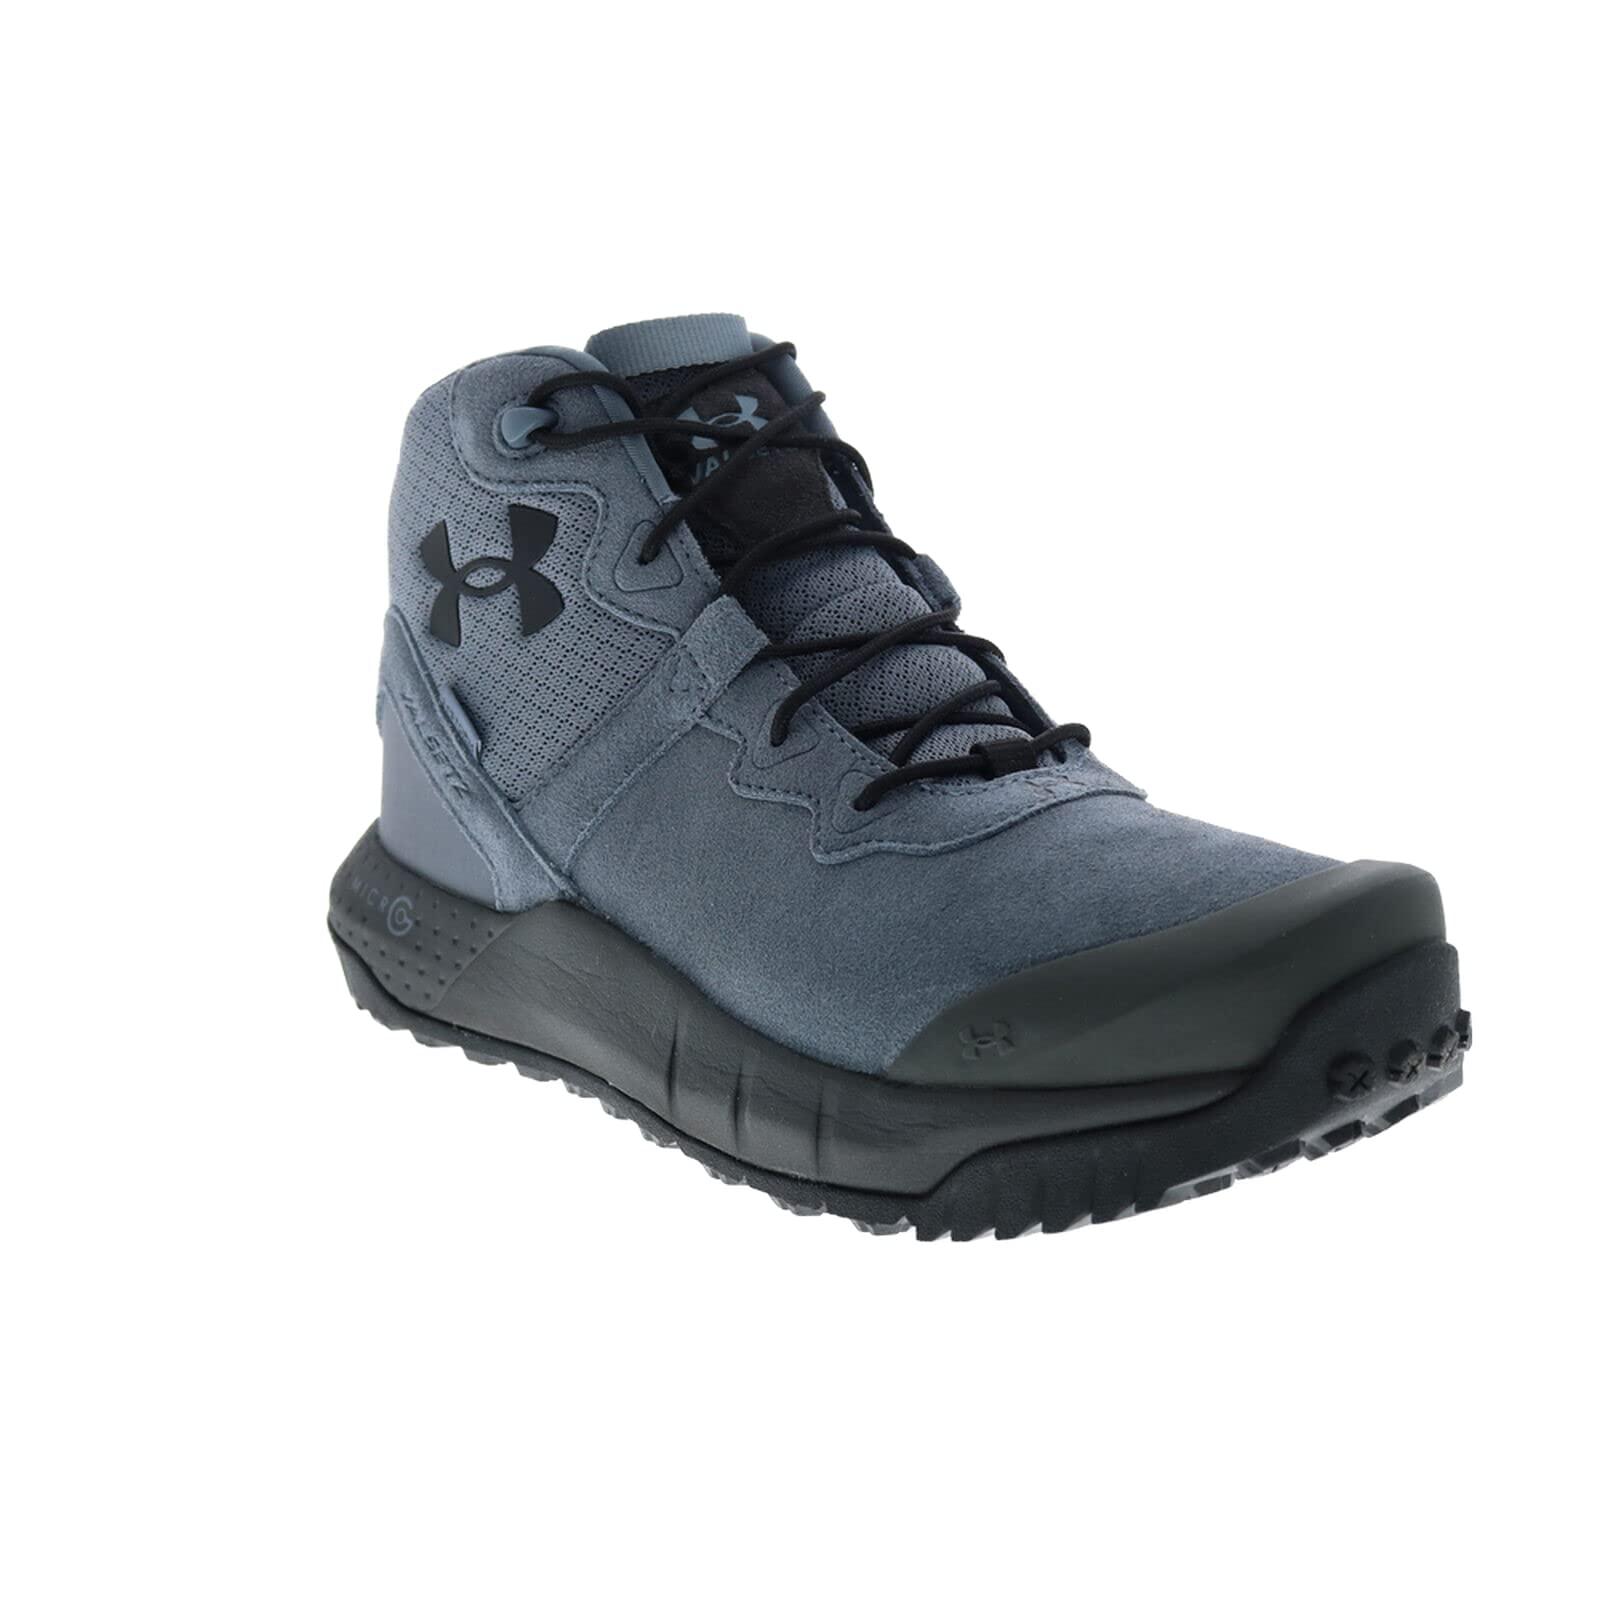 Under Armour Micro G Valsetz Mid Waterproof Leather Boots Military And ...